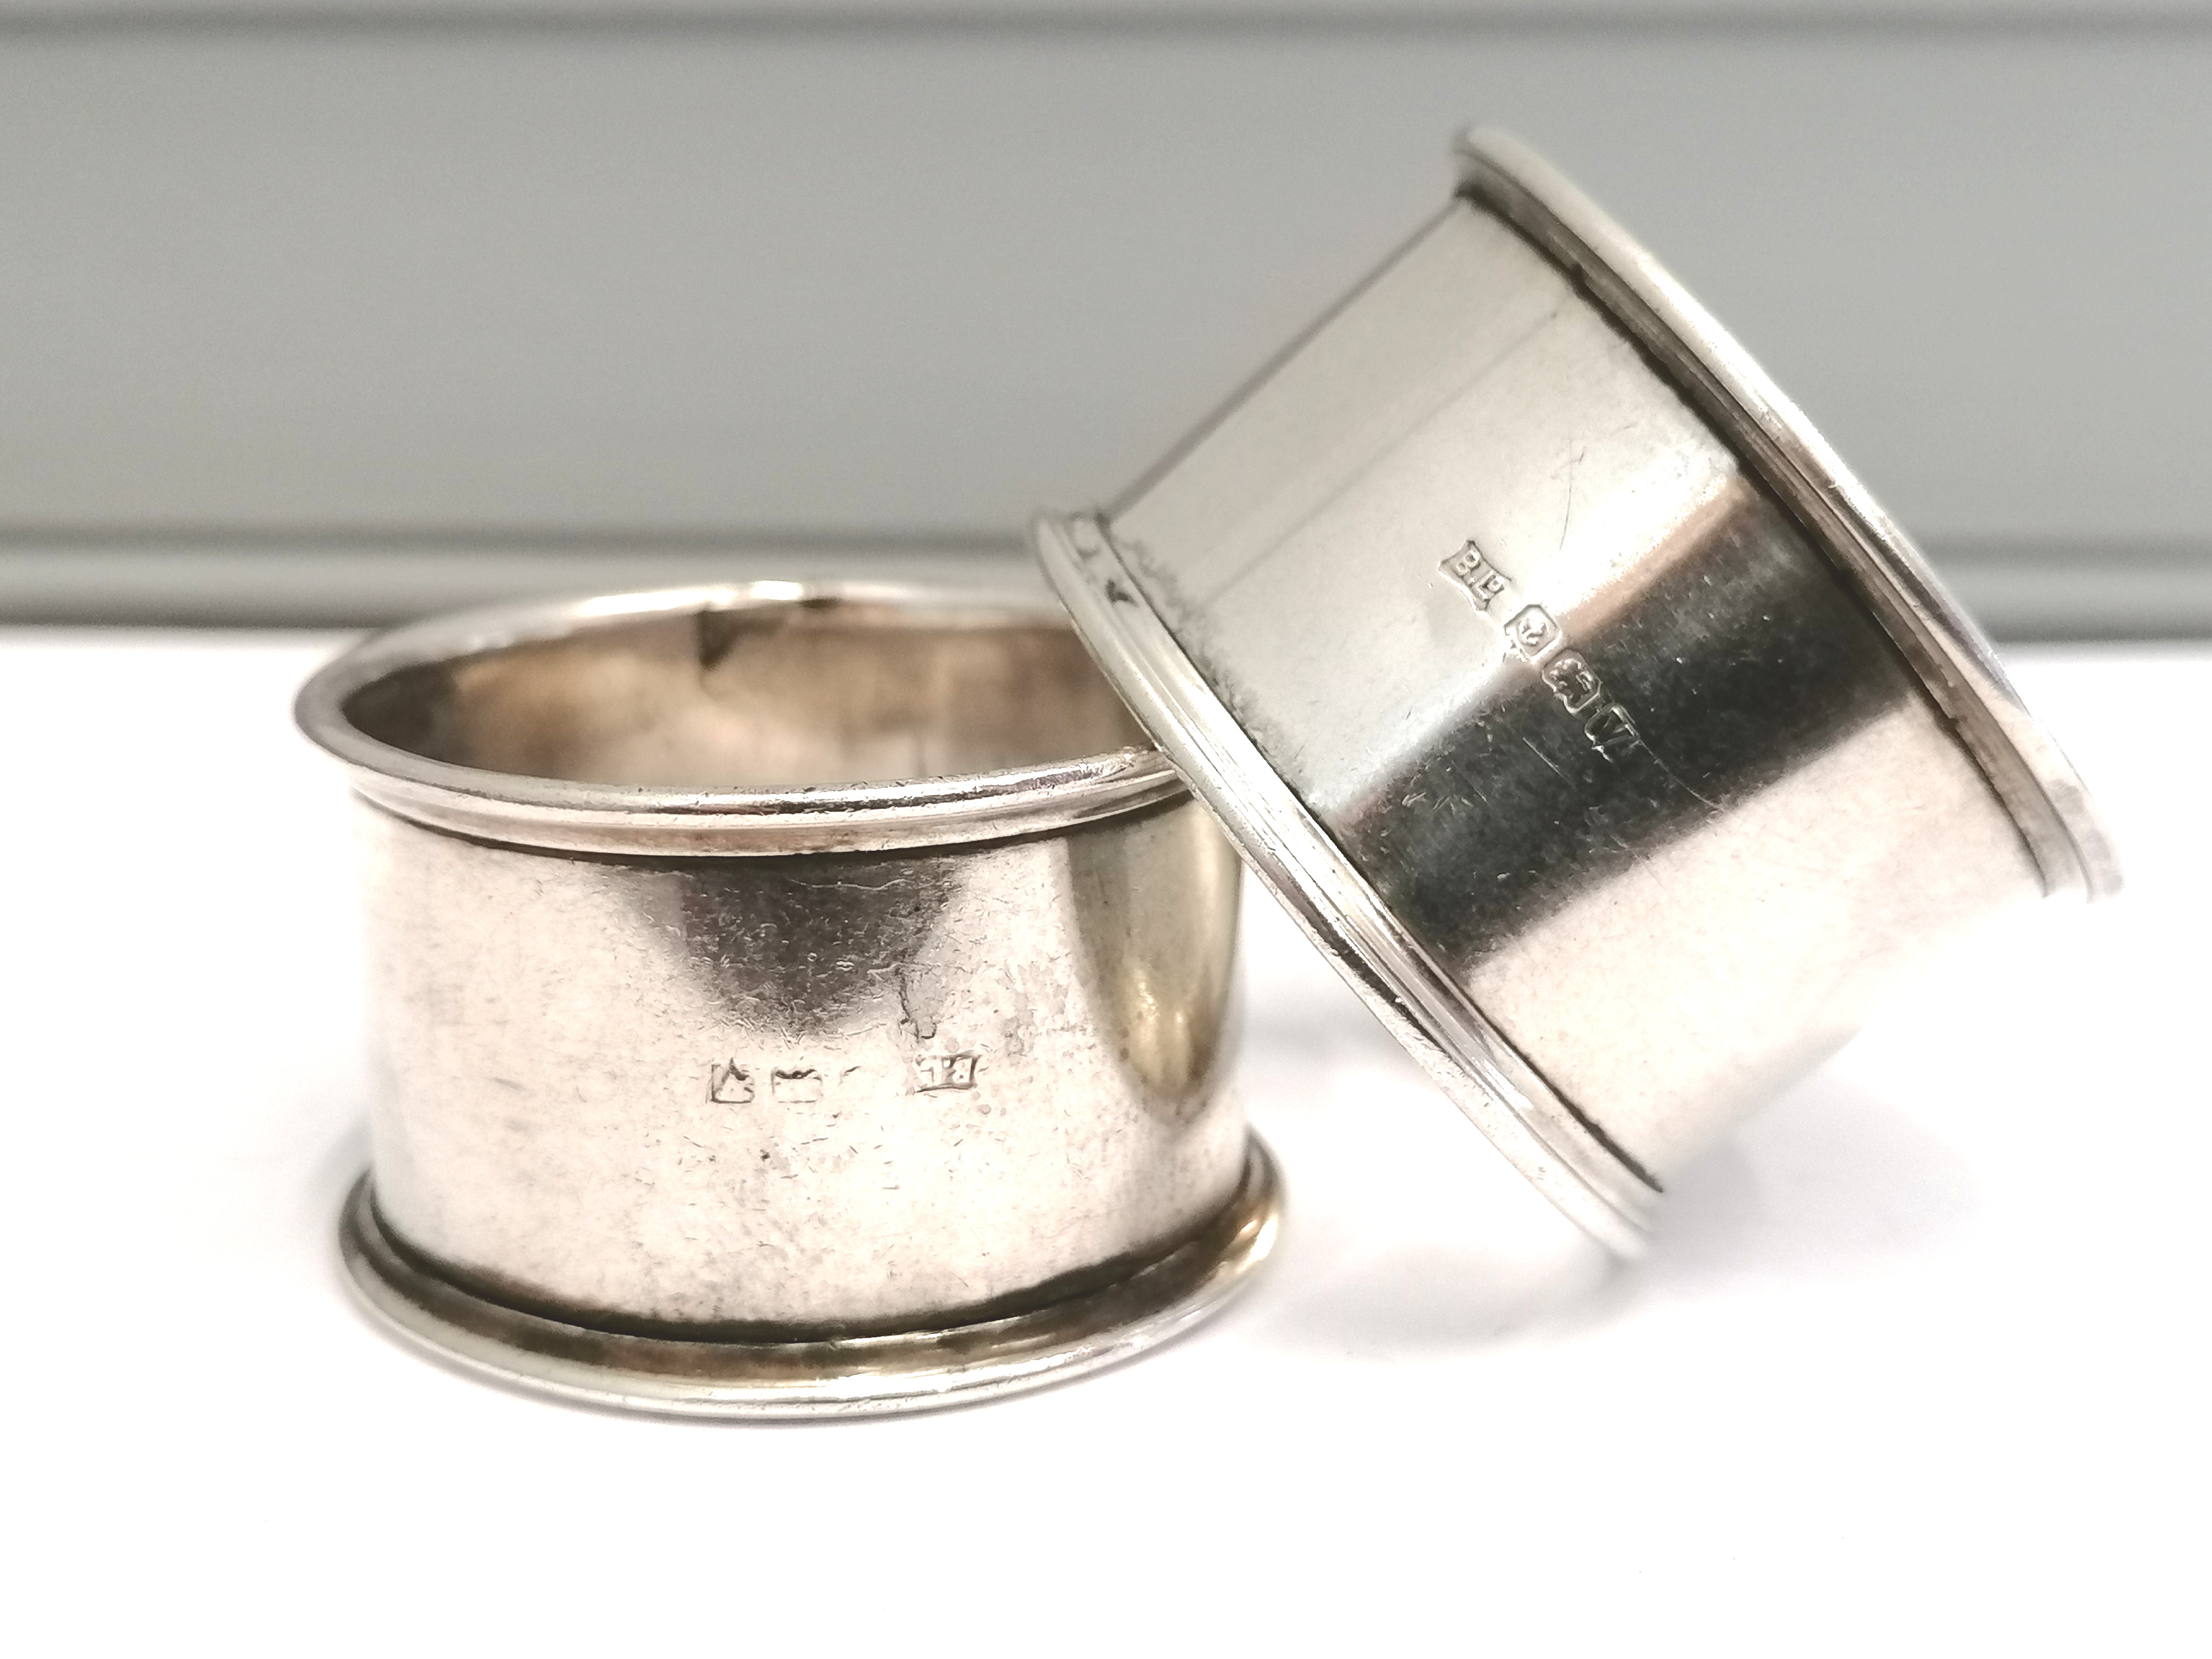 A pair of Bishton’s Ltd of Birmingham silver napkin rings dated 1945. Approximately 45g